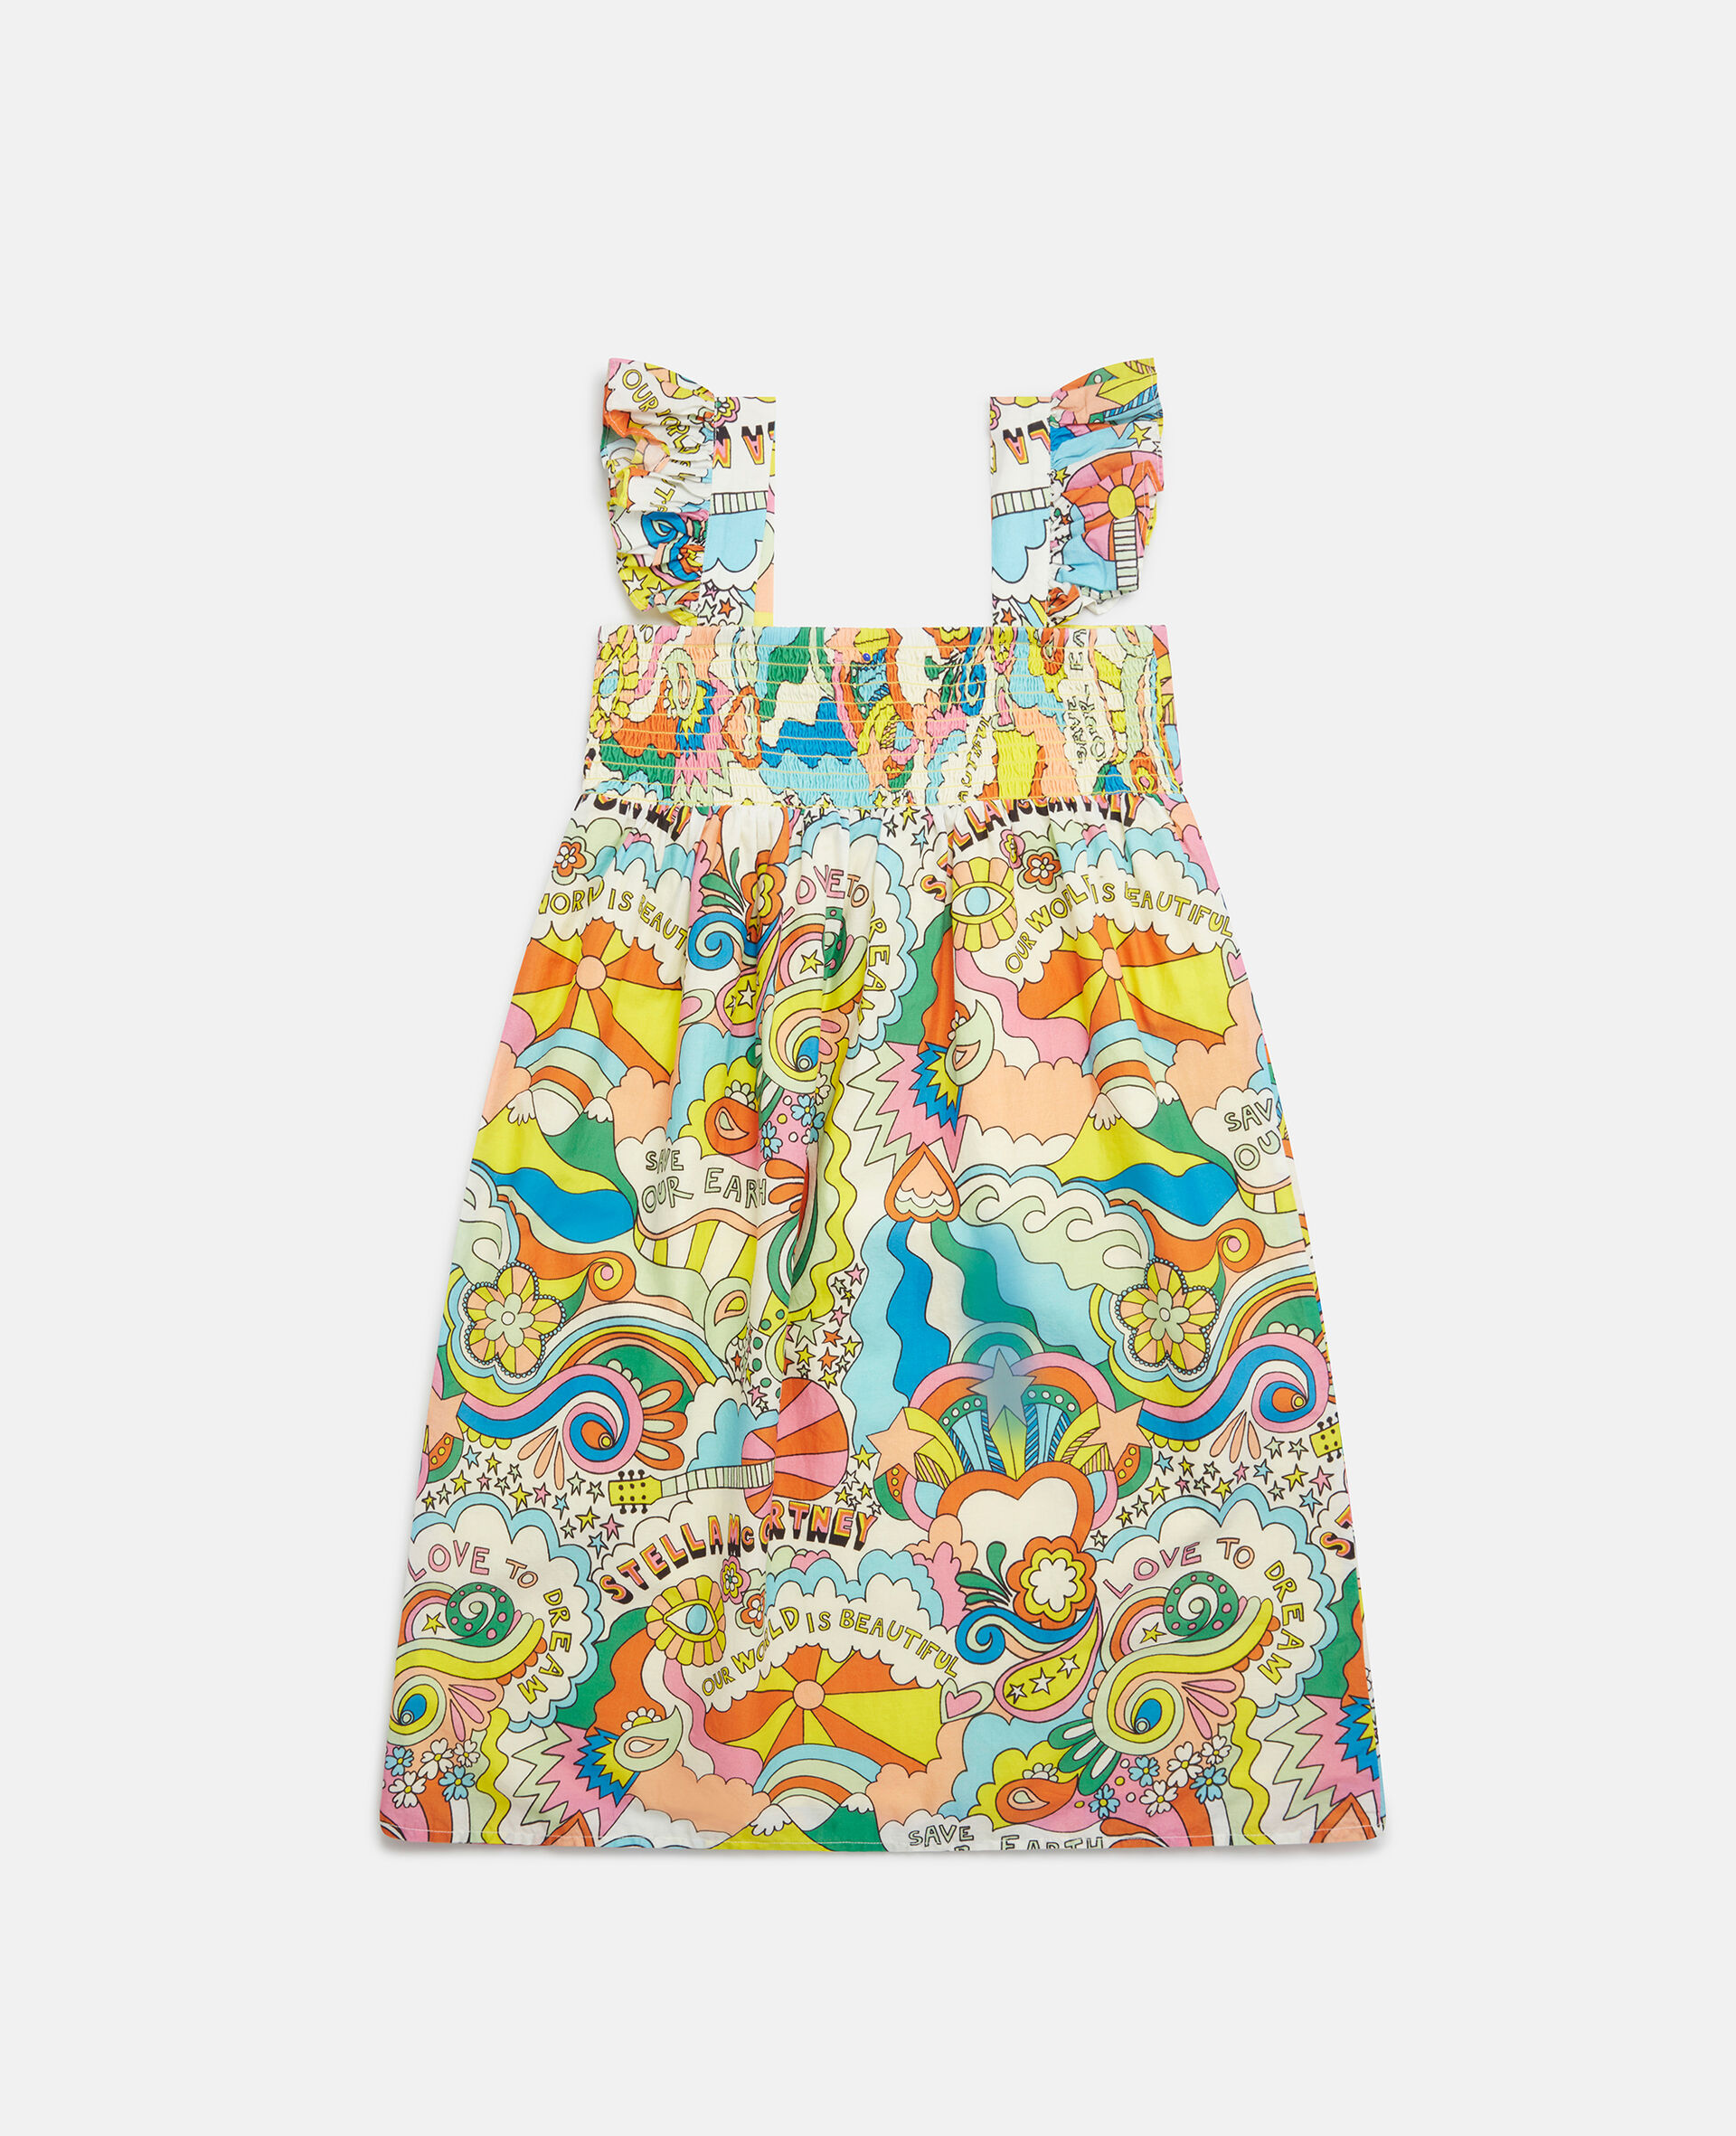 'Love to Dream' Print Sundress-White-large image number 2